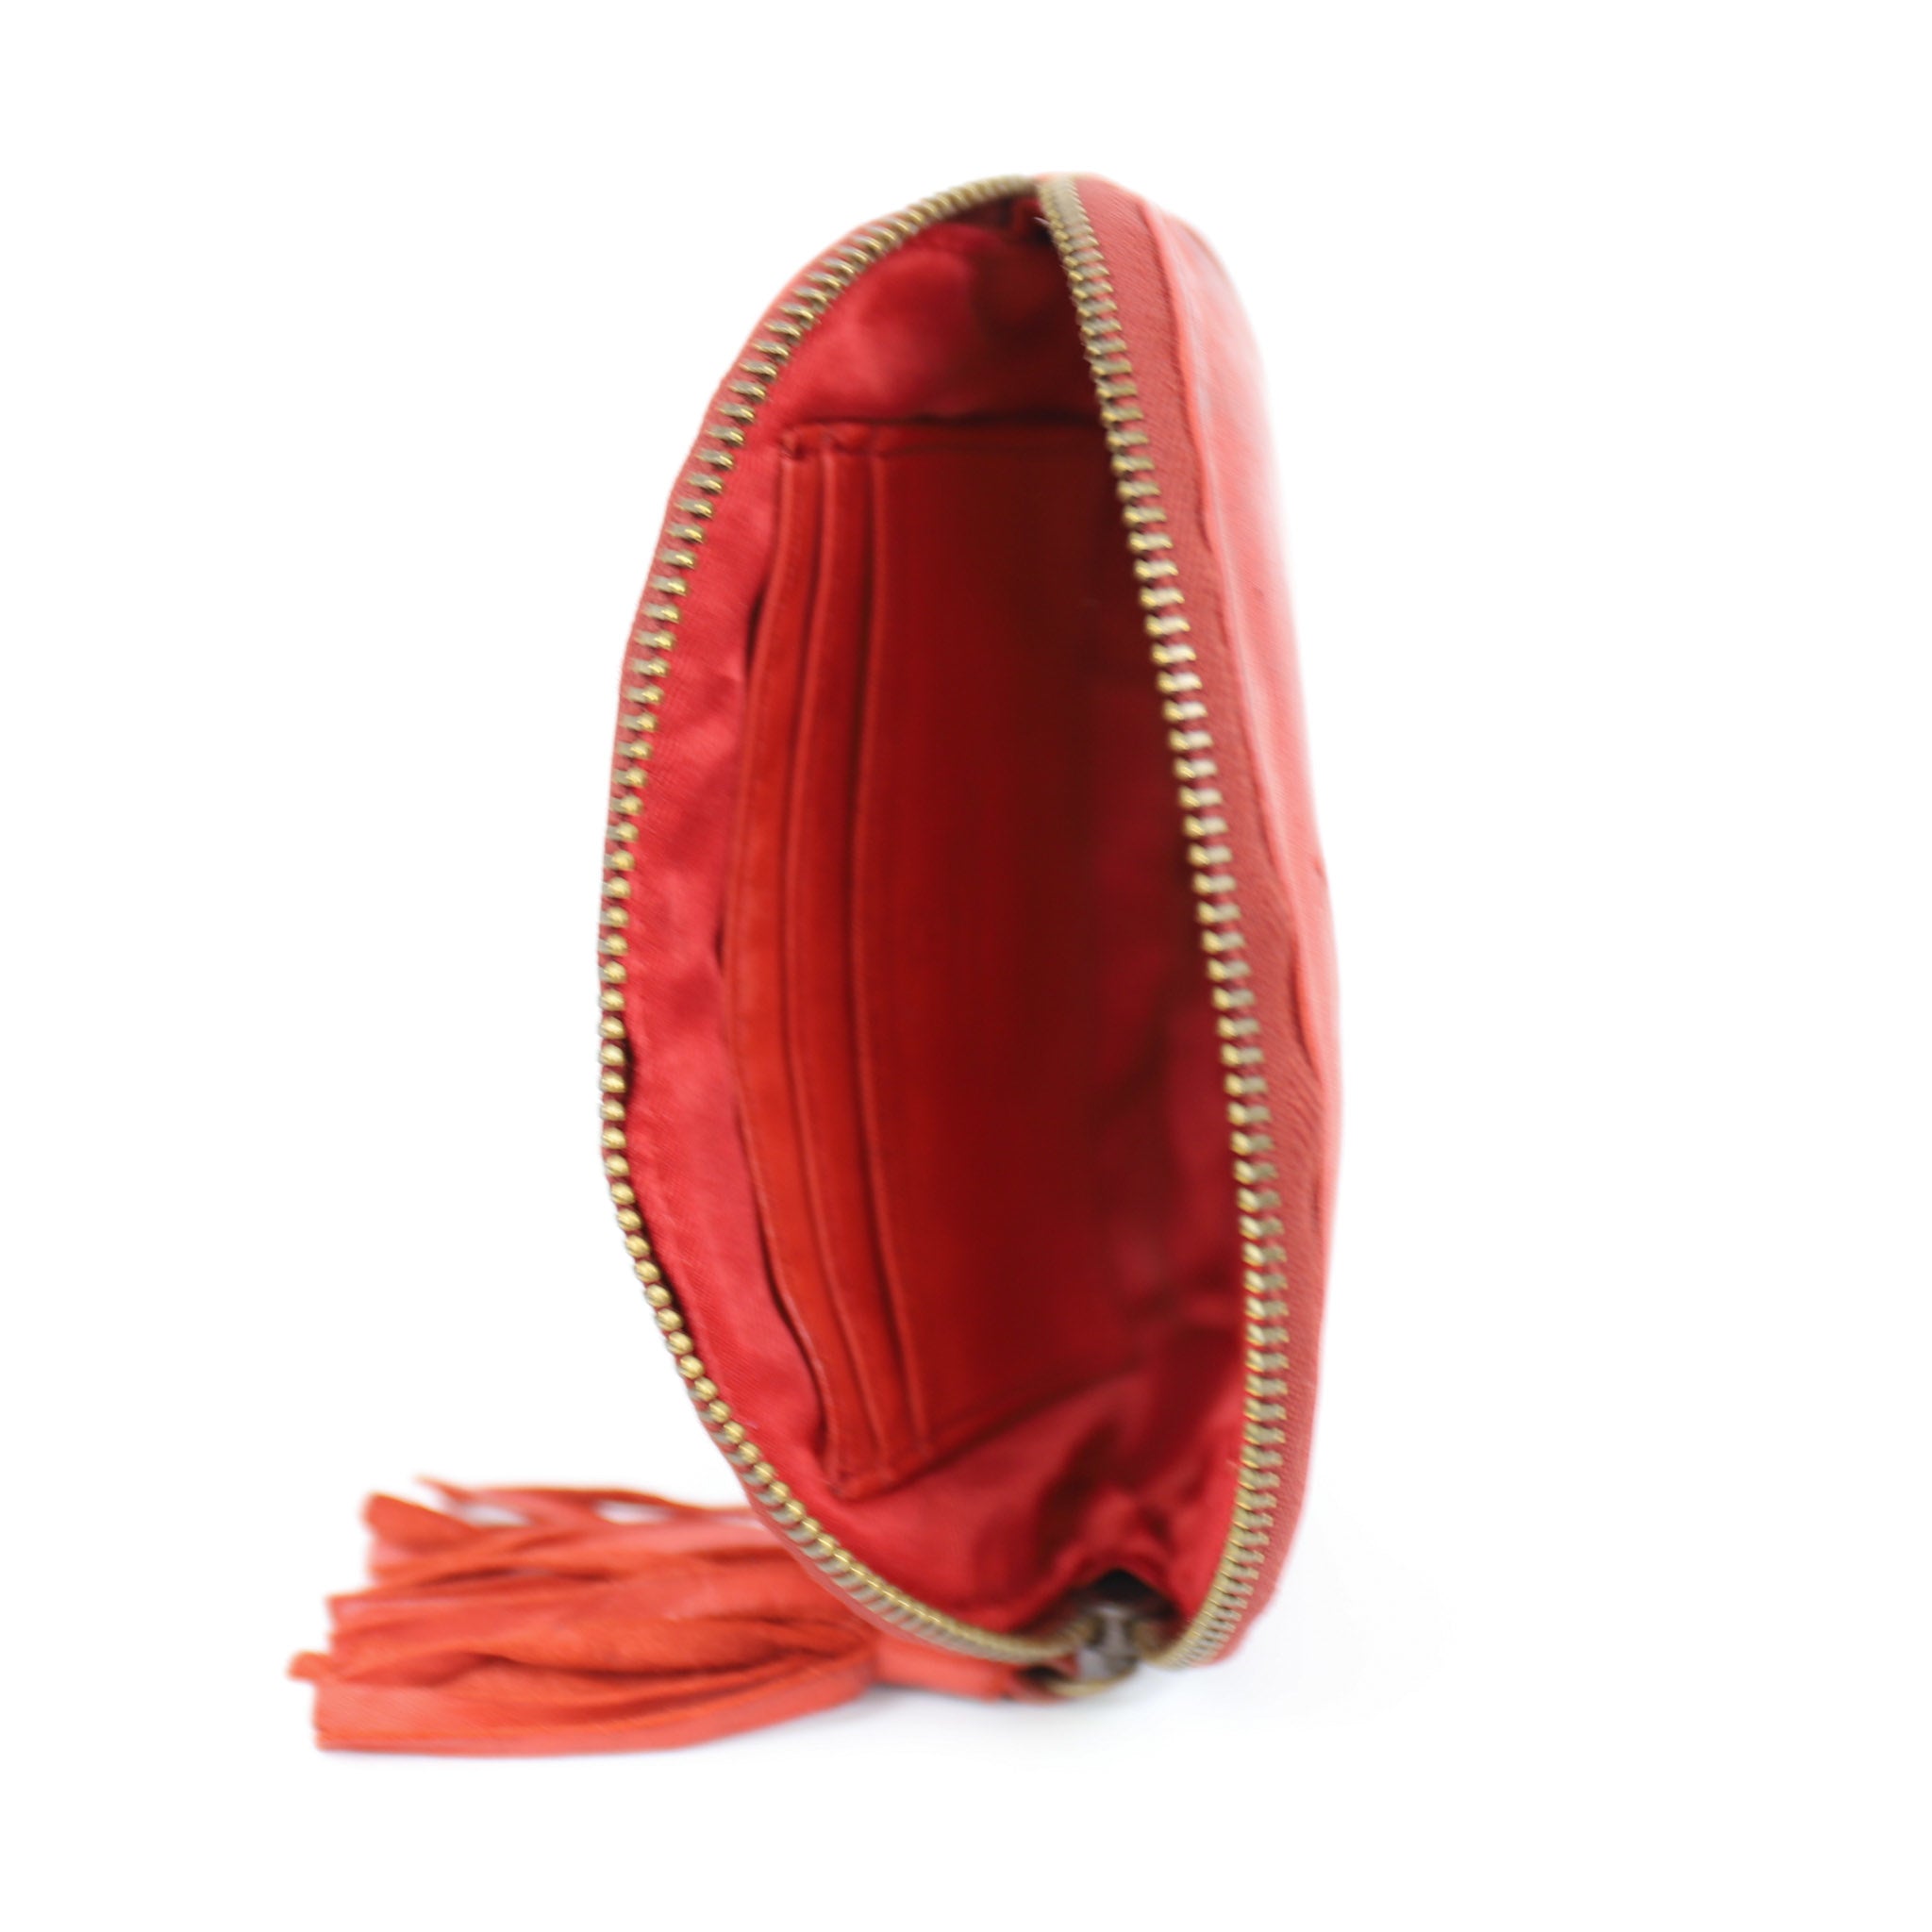 Wallet 'Penny' red - CL 18366